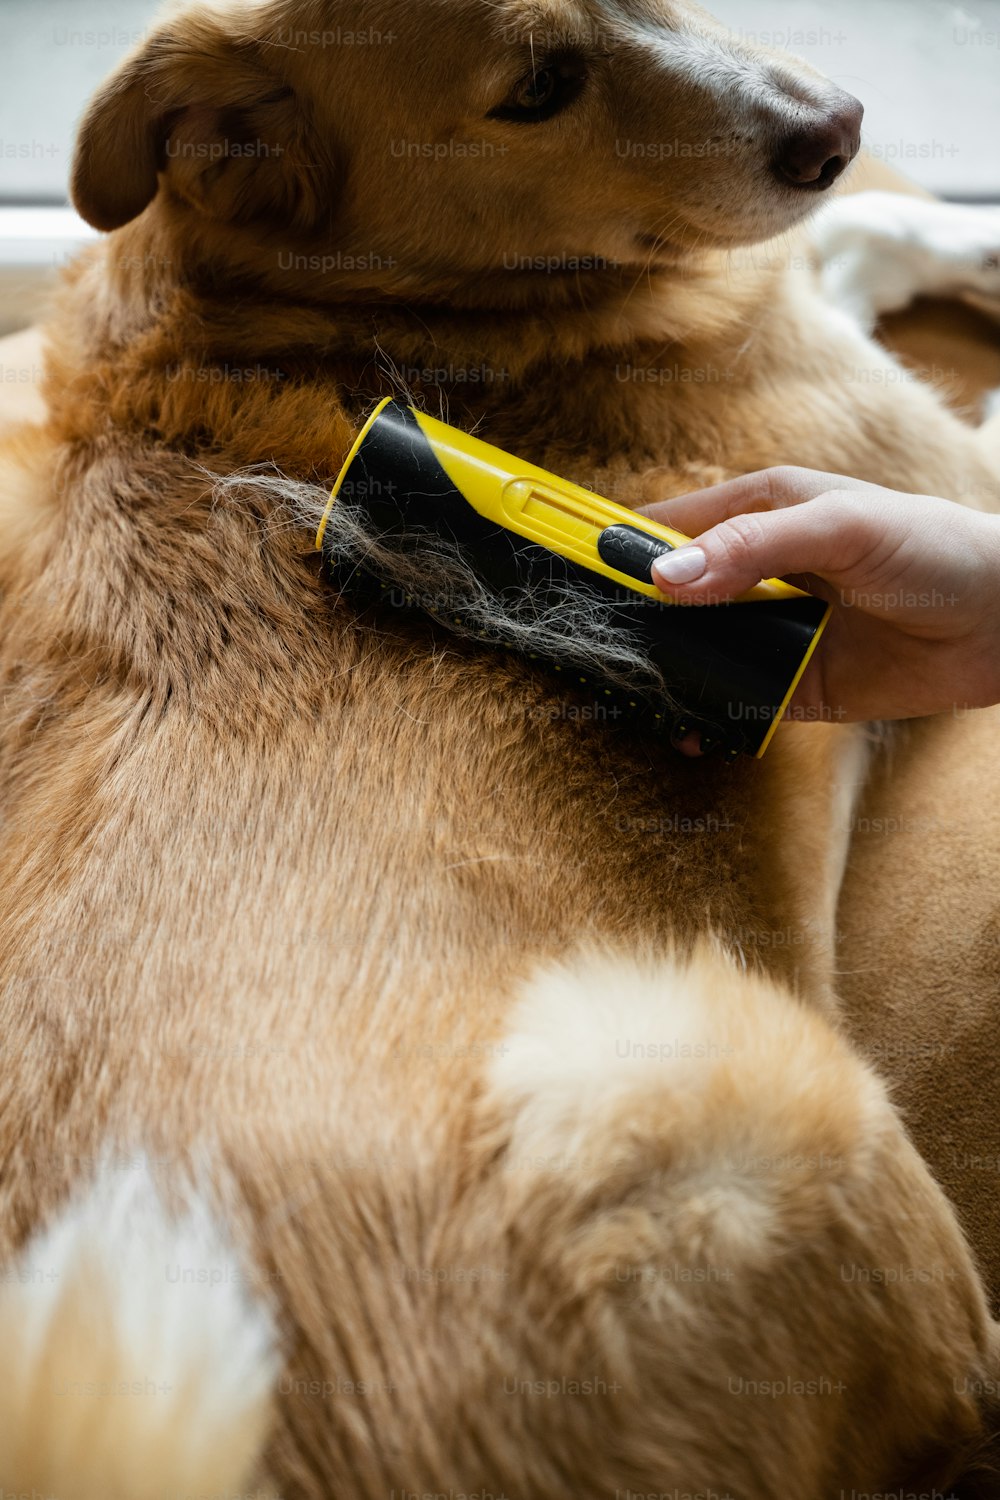 a dog being groomed by a person with a yellow comb